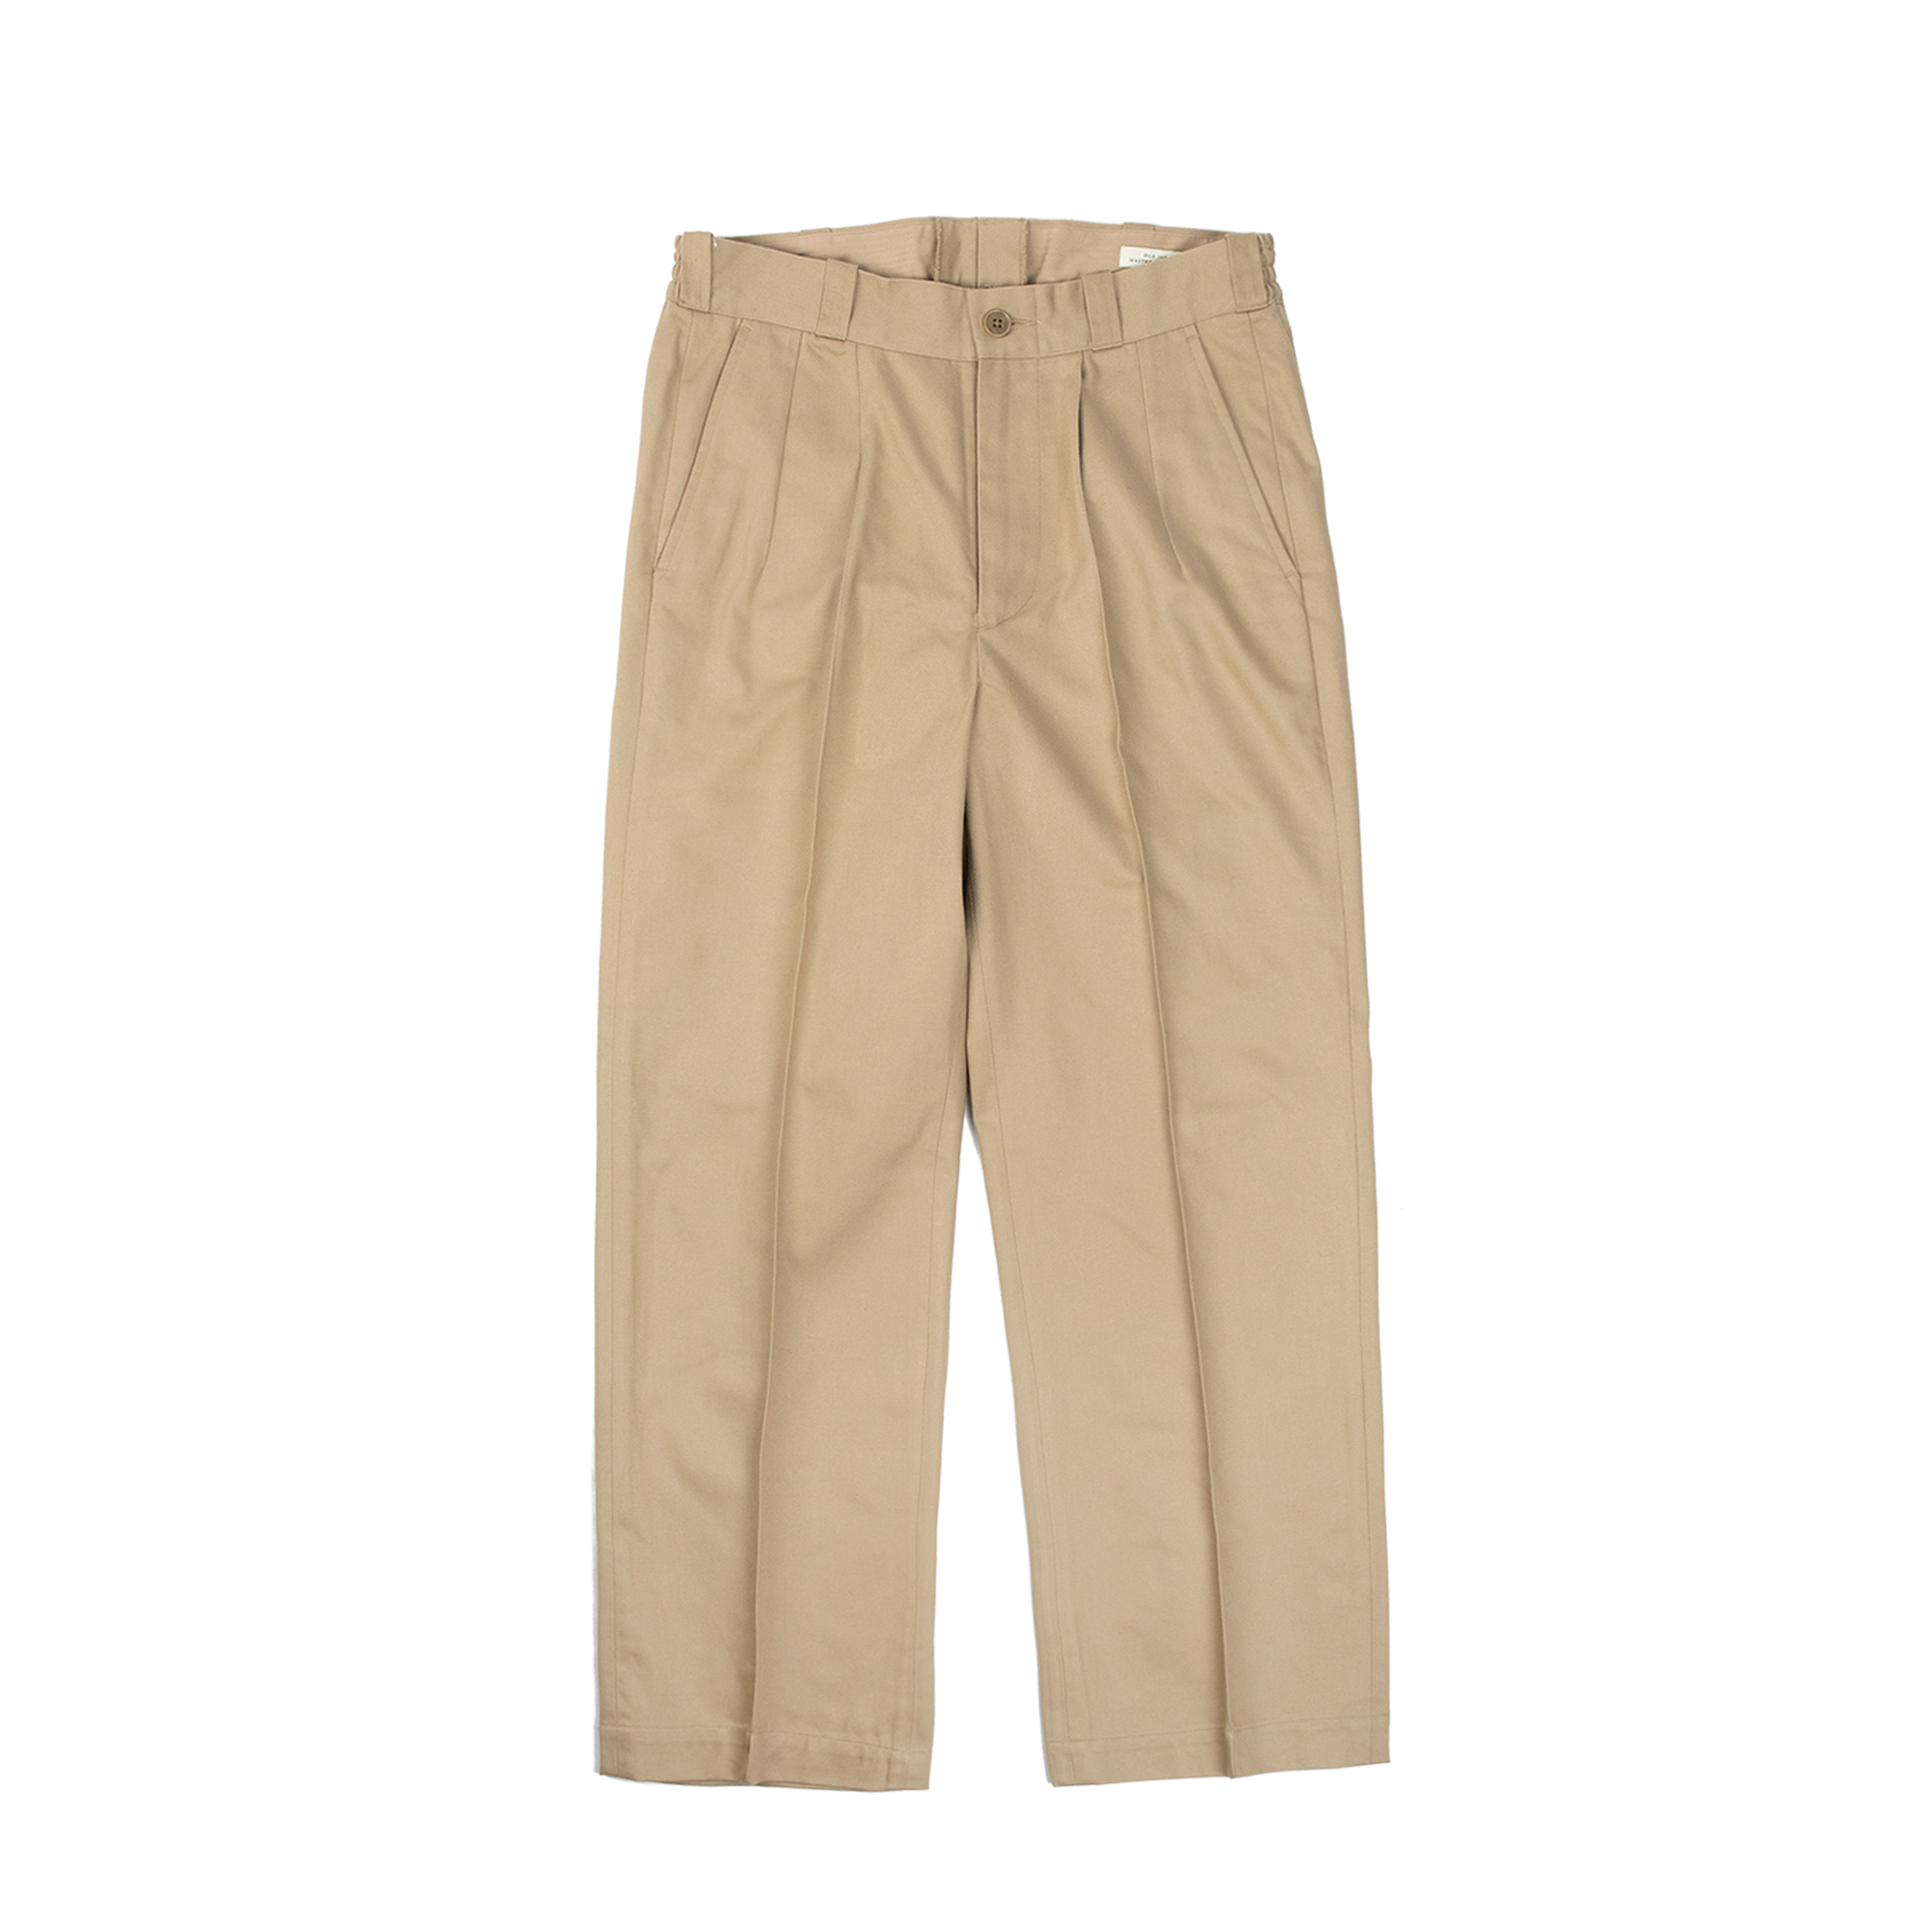 Old Joe Brand - Front Tuck Army Trouser (Sand)